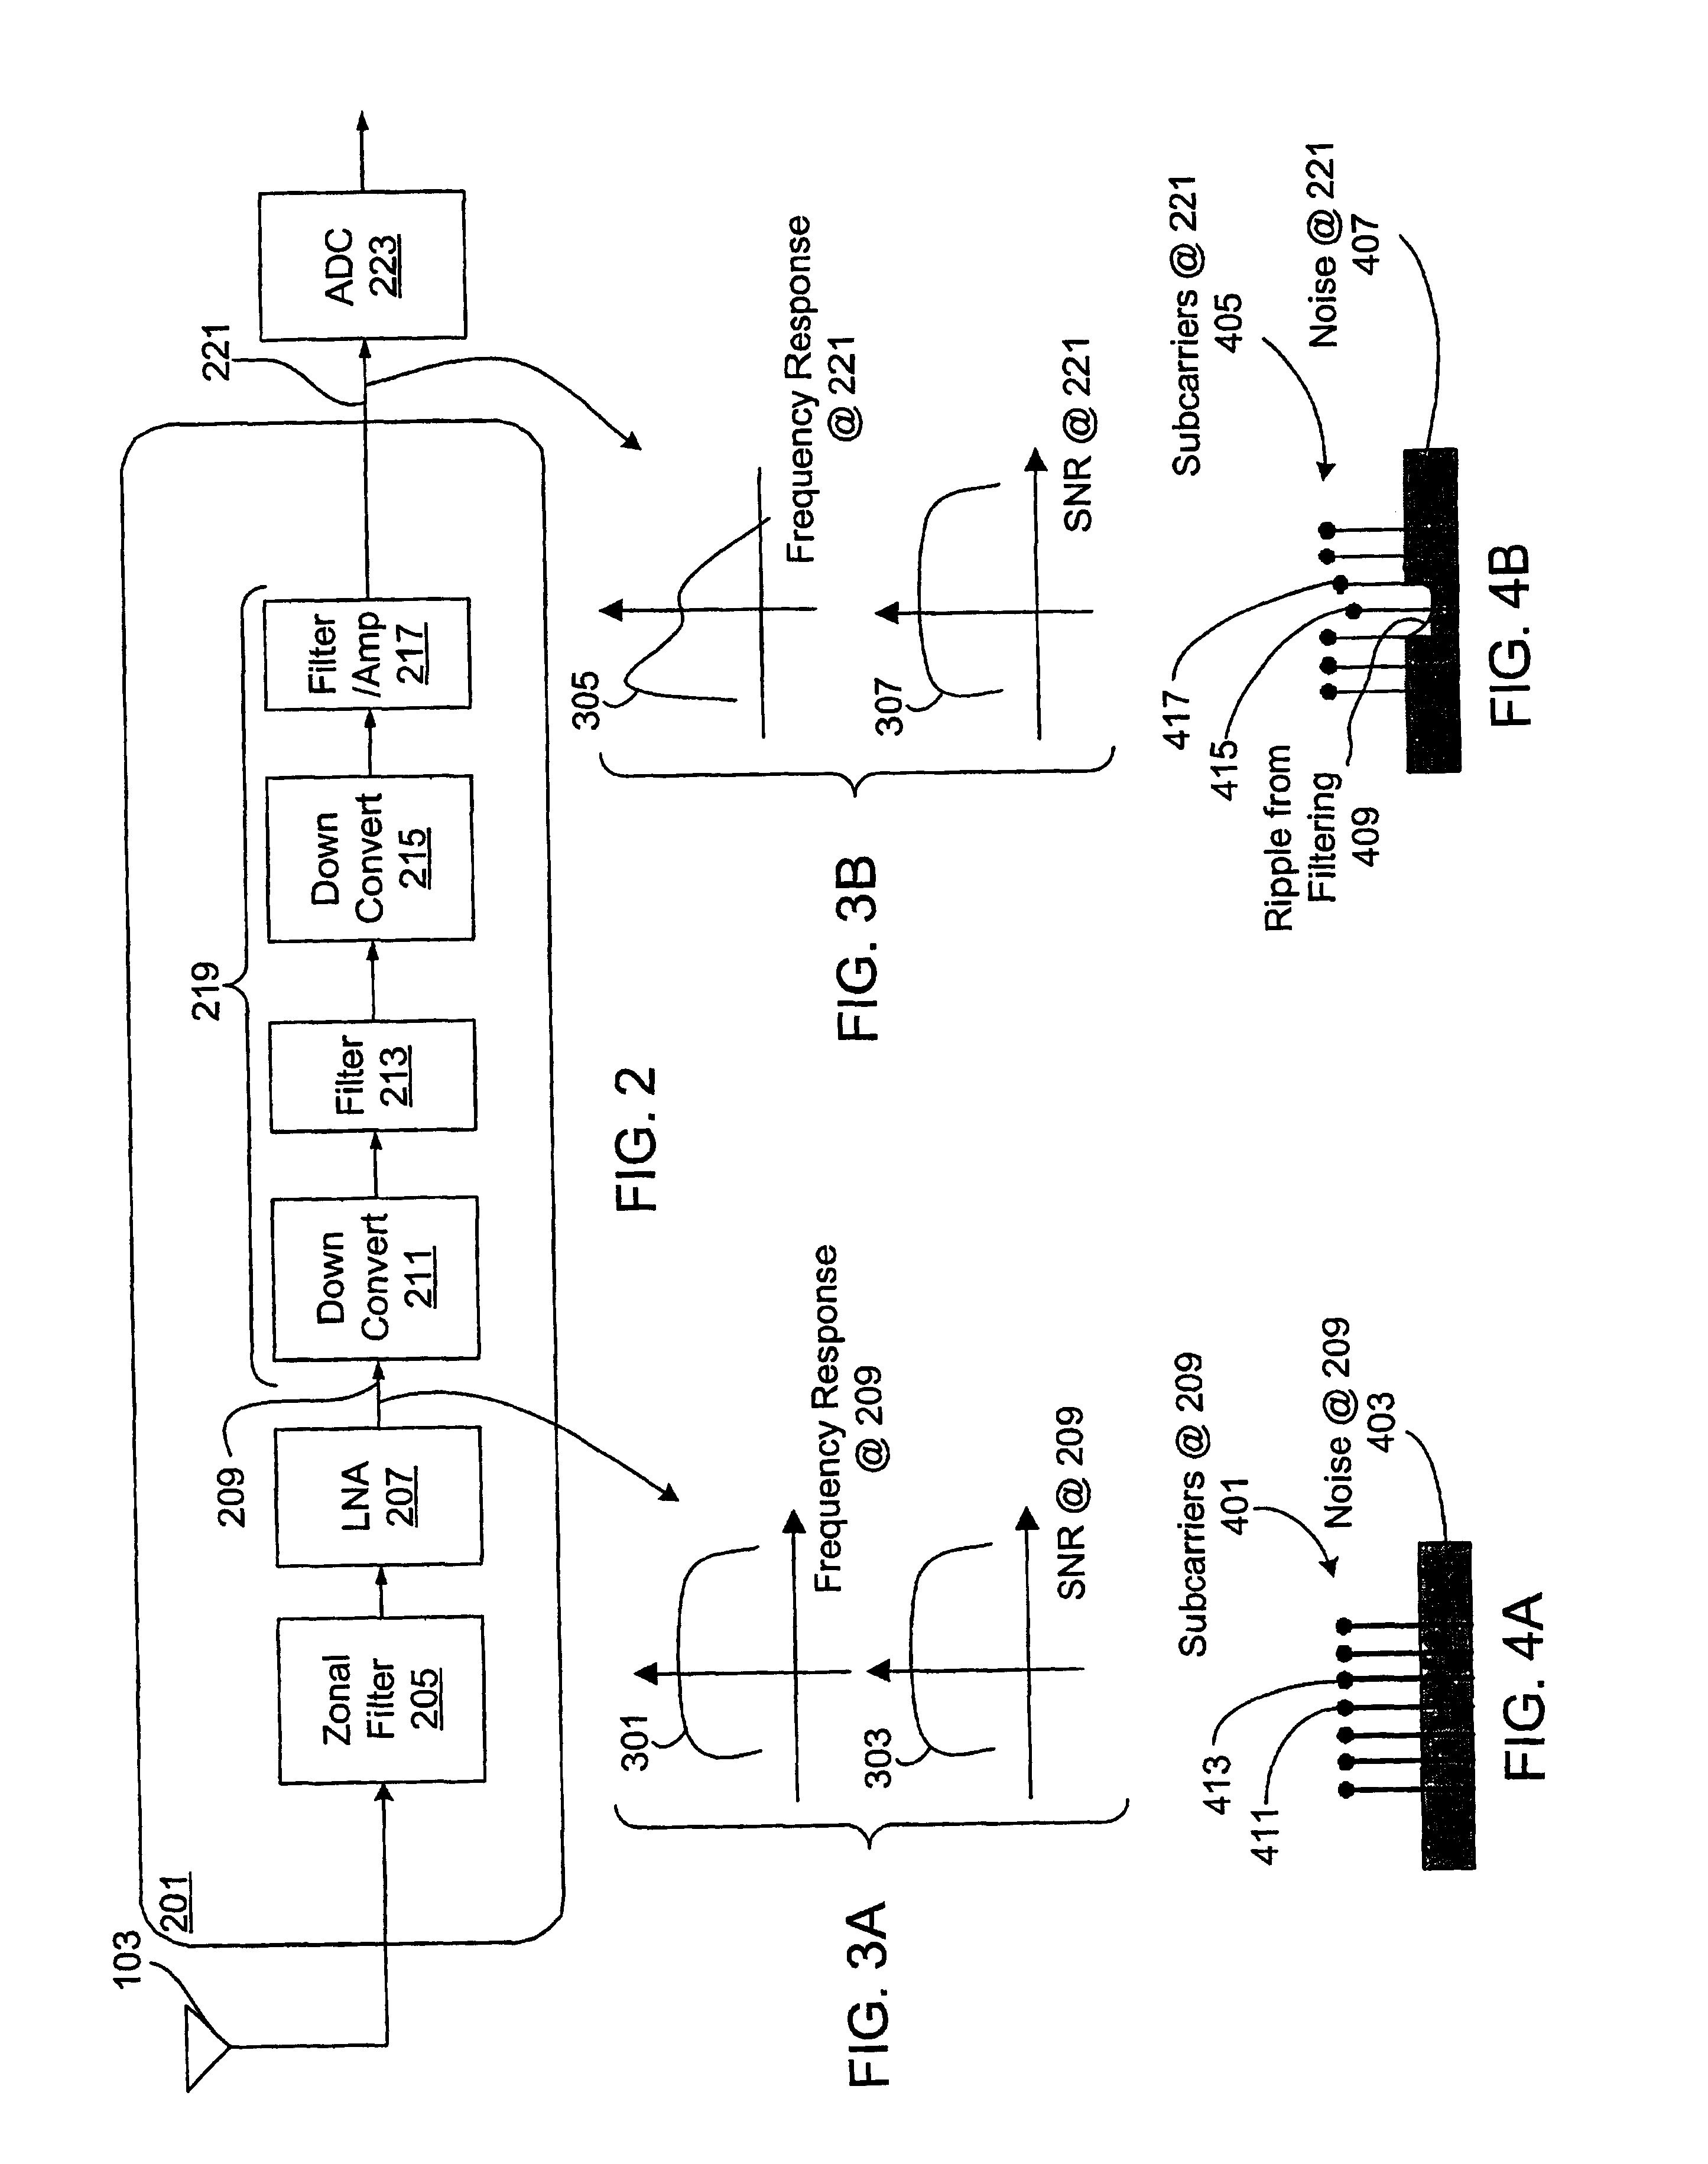 Soft decision gain compensation for receive filter attenuation